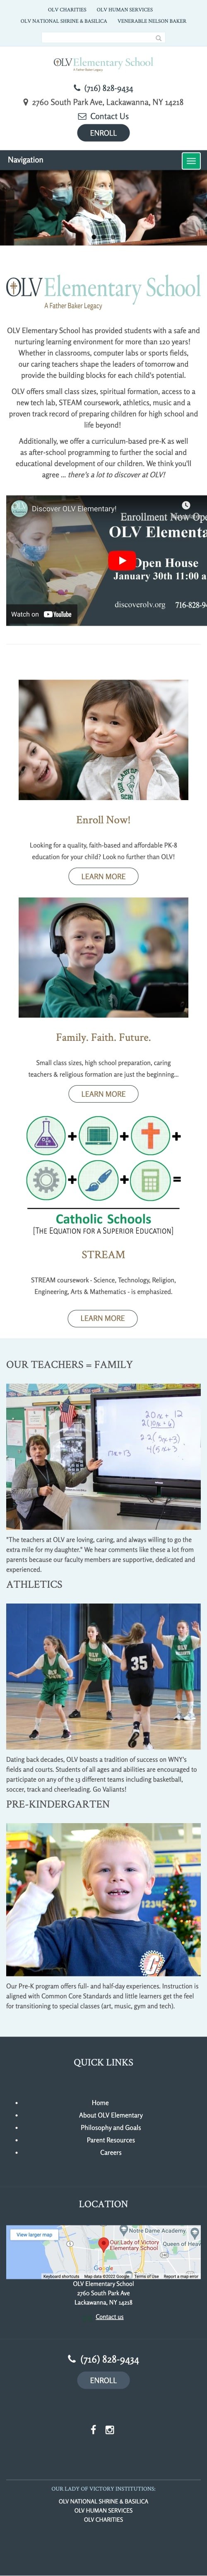 Our Lady of Victory Elementary Website - Mobile